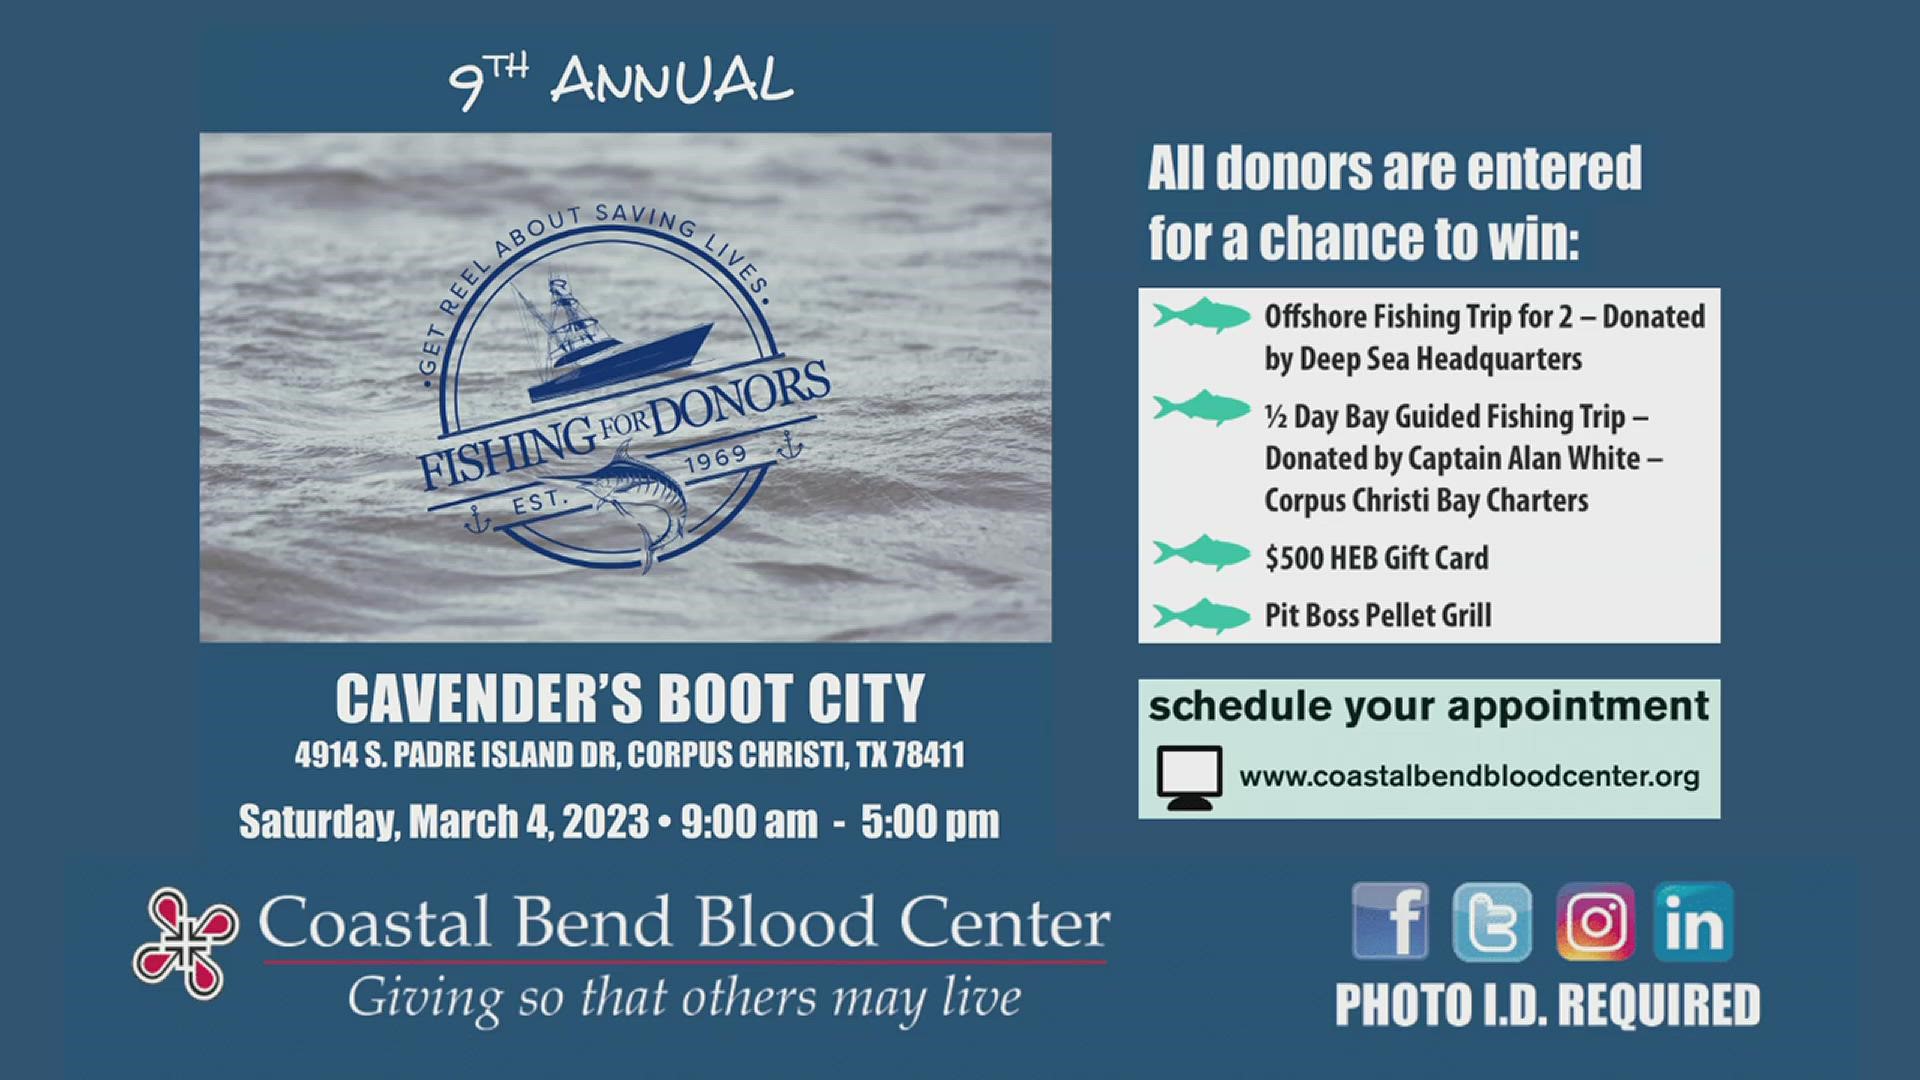 The Coastal Bend Blood Center "Fishing For Donors" Blood Drive at Cavender's Boot City will last from 9 a.m. to 5 p.m. on Mar. 4, 2023.